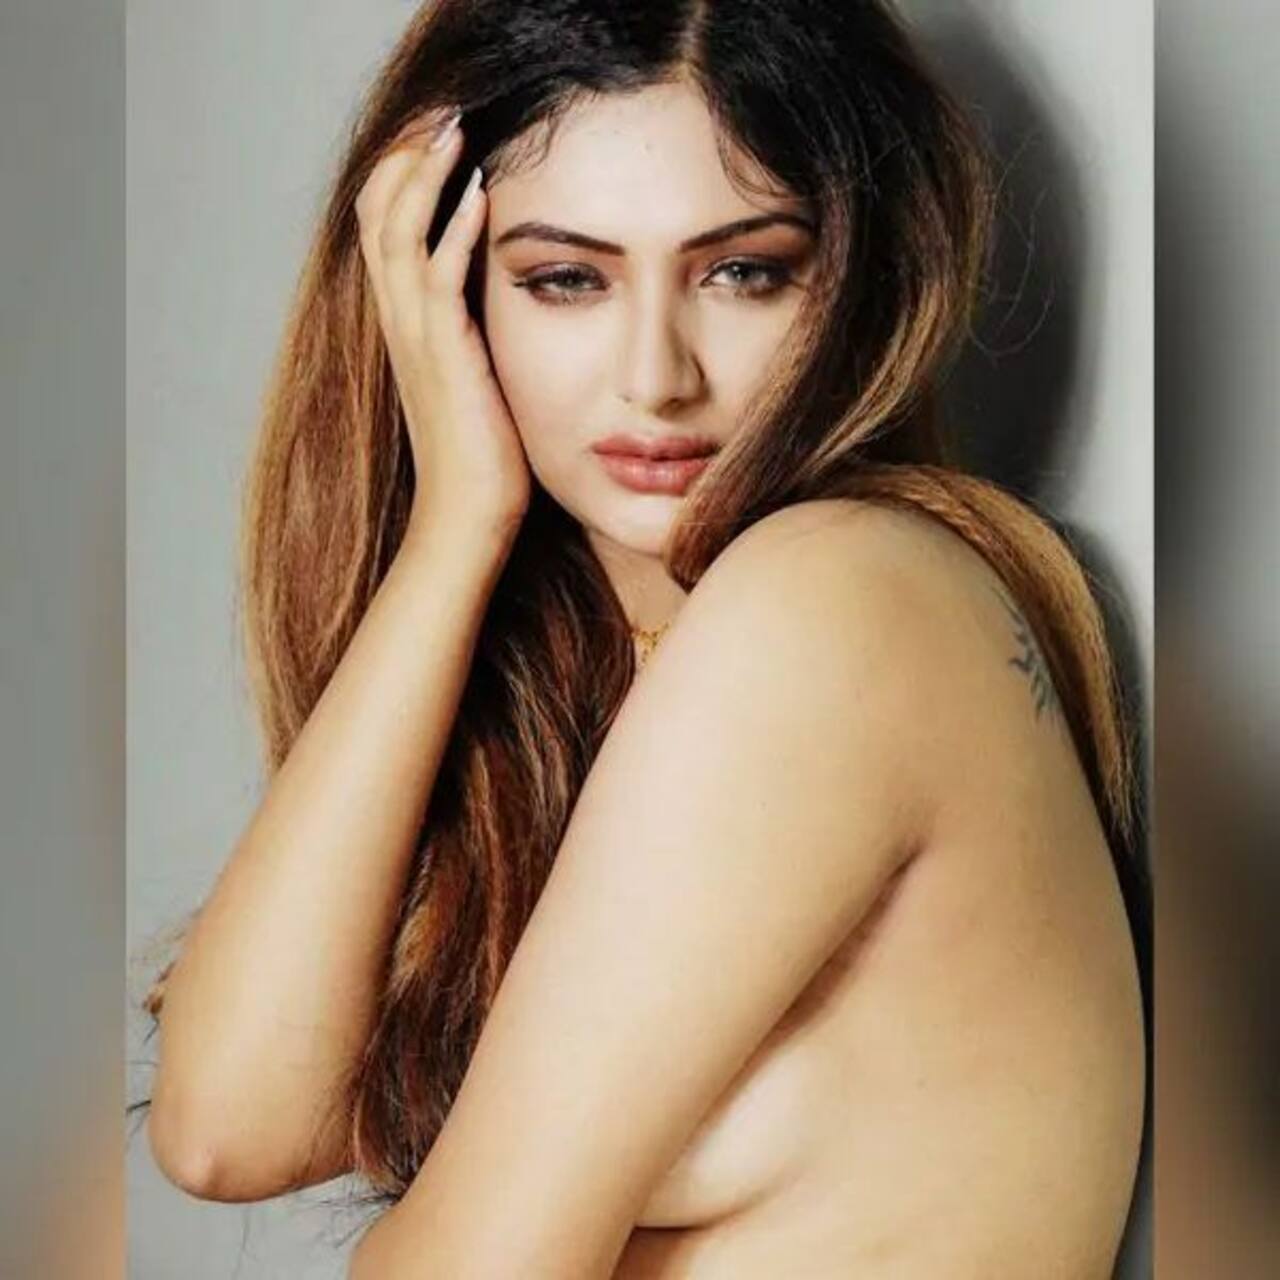 Khushi Mukherjee Of Splitsvilla Fame Has Fans Hooked With Her Topless Pictures 1563857